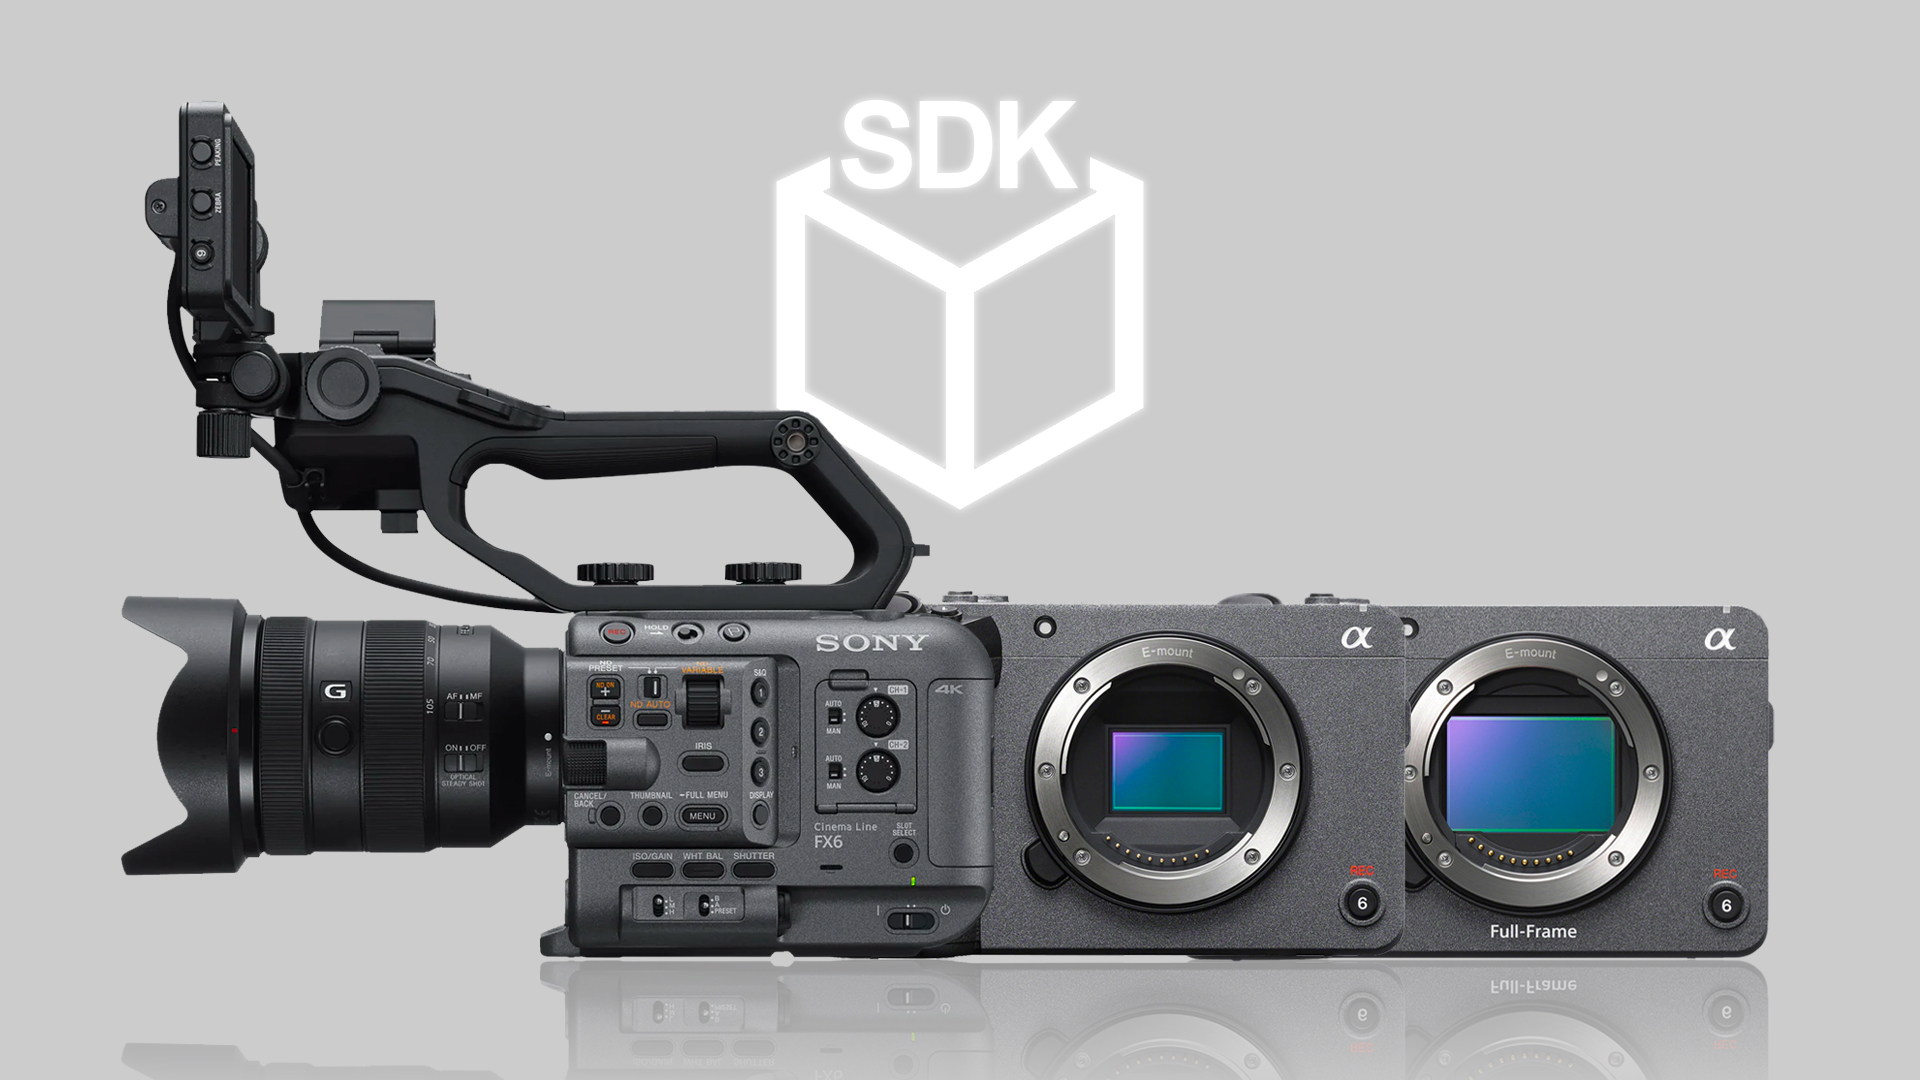 Sony Camera Remote SDK Version 1.06 – Adds Compatibility for FX6, FX3, and FX30